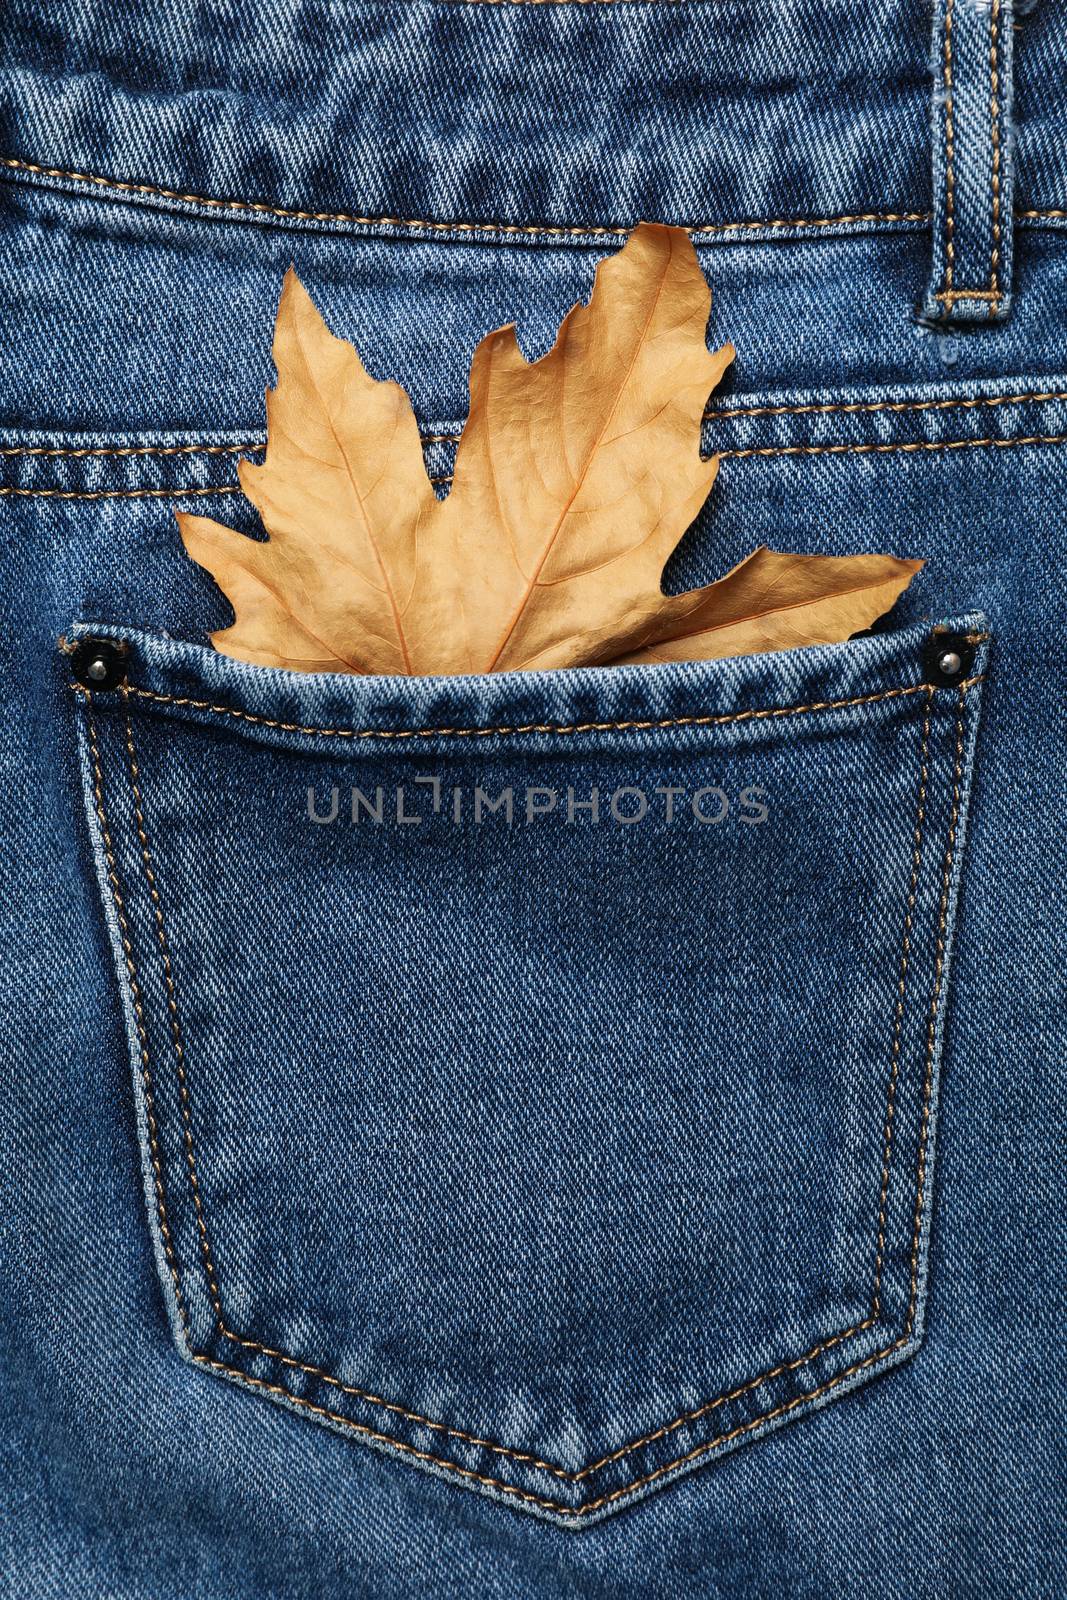 Back of jeans with leaf in pocket, space for text